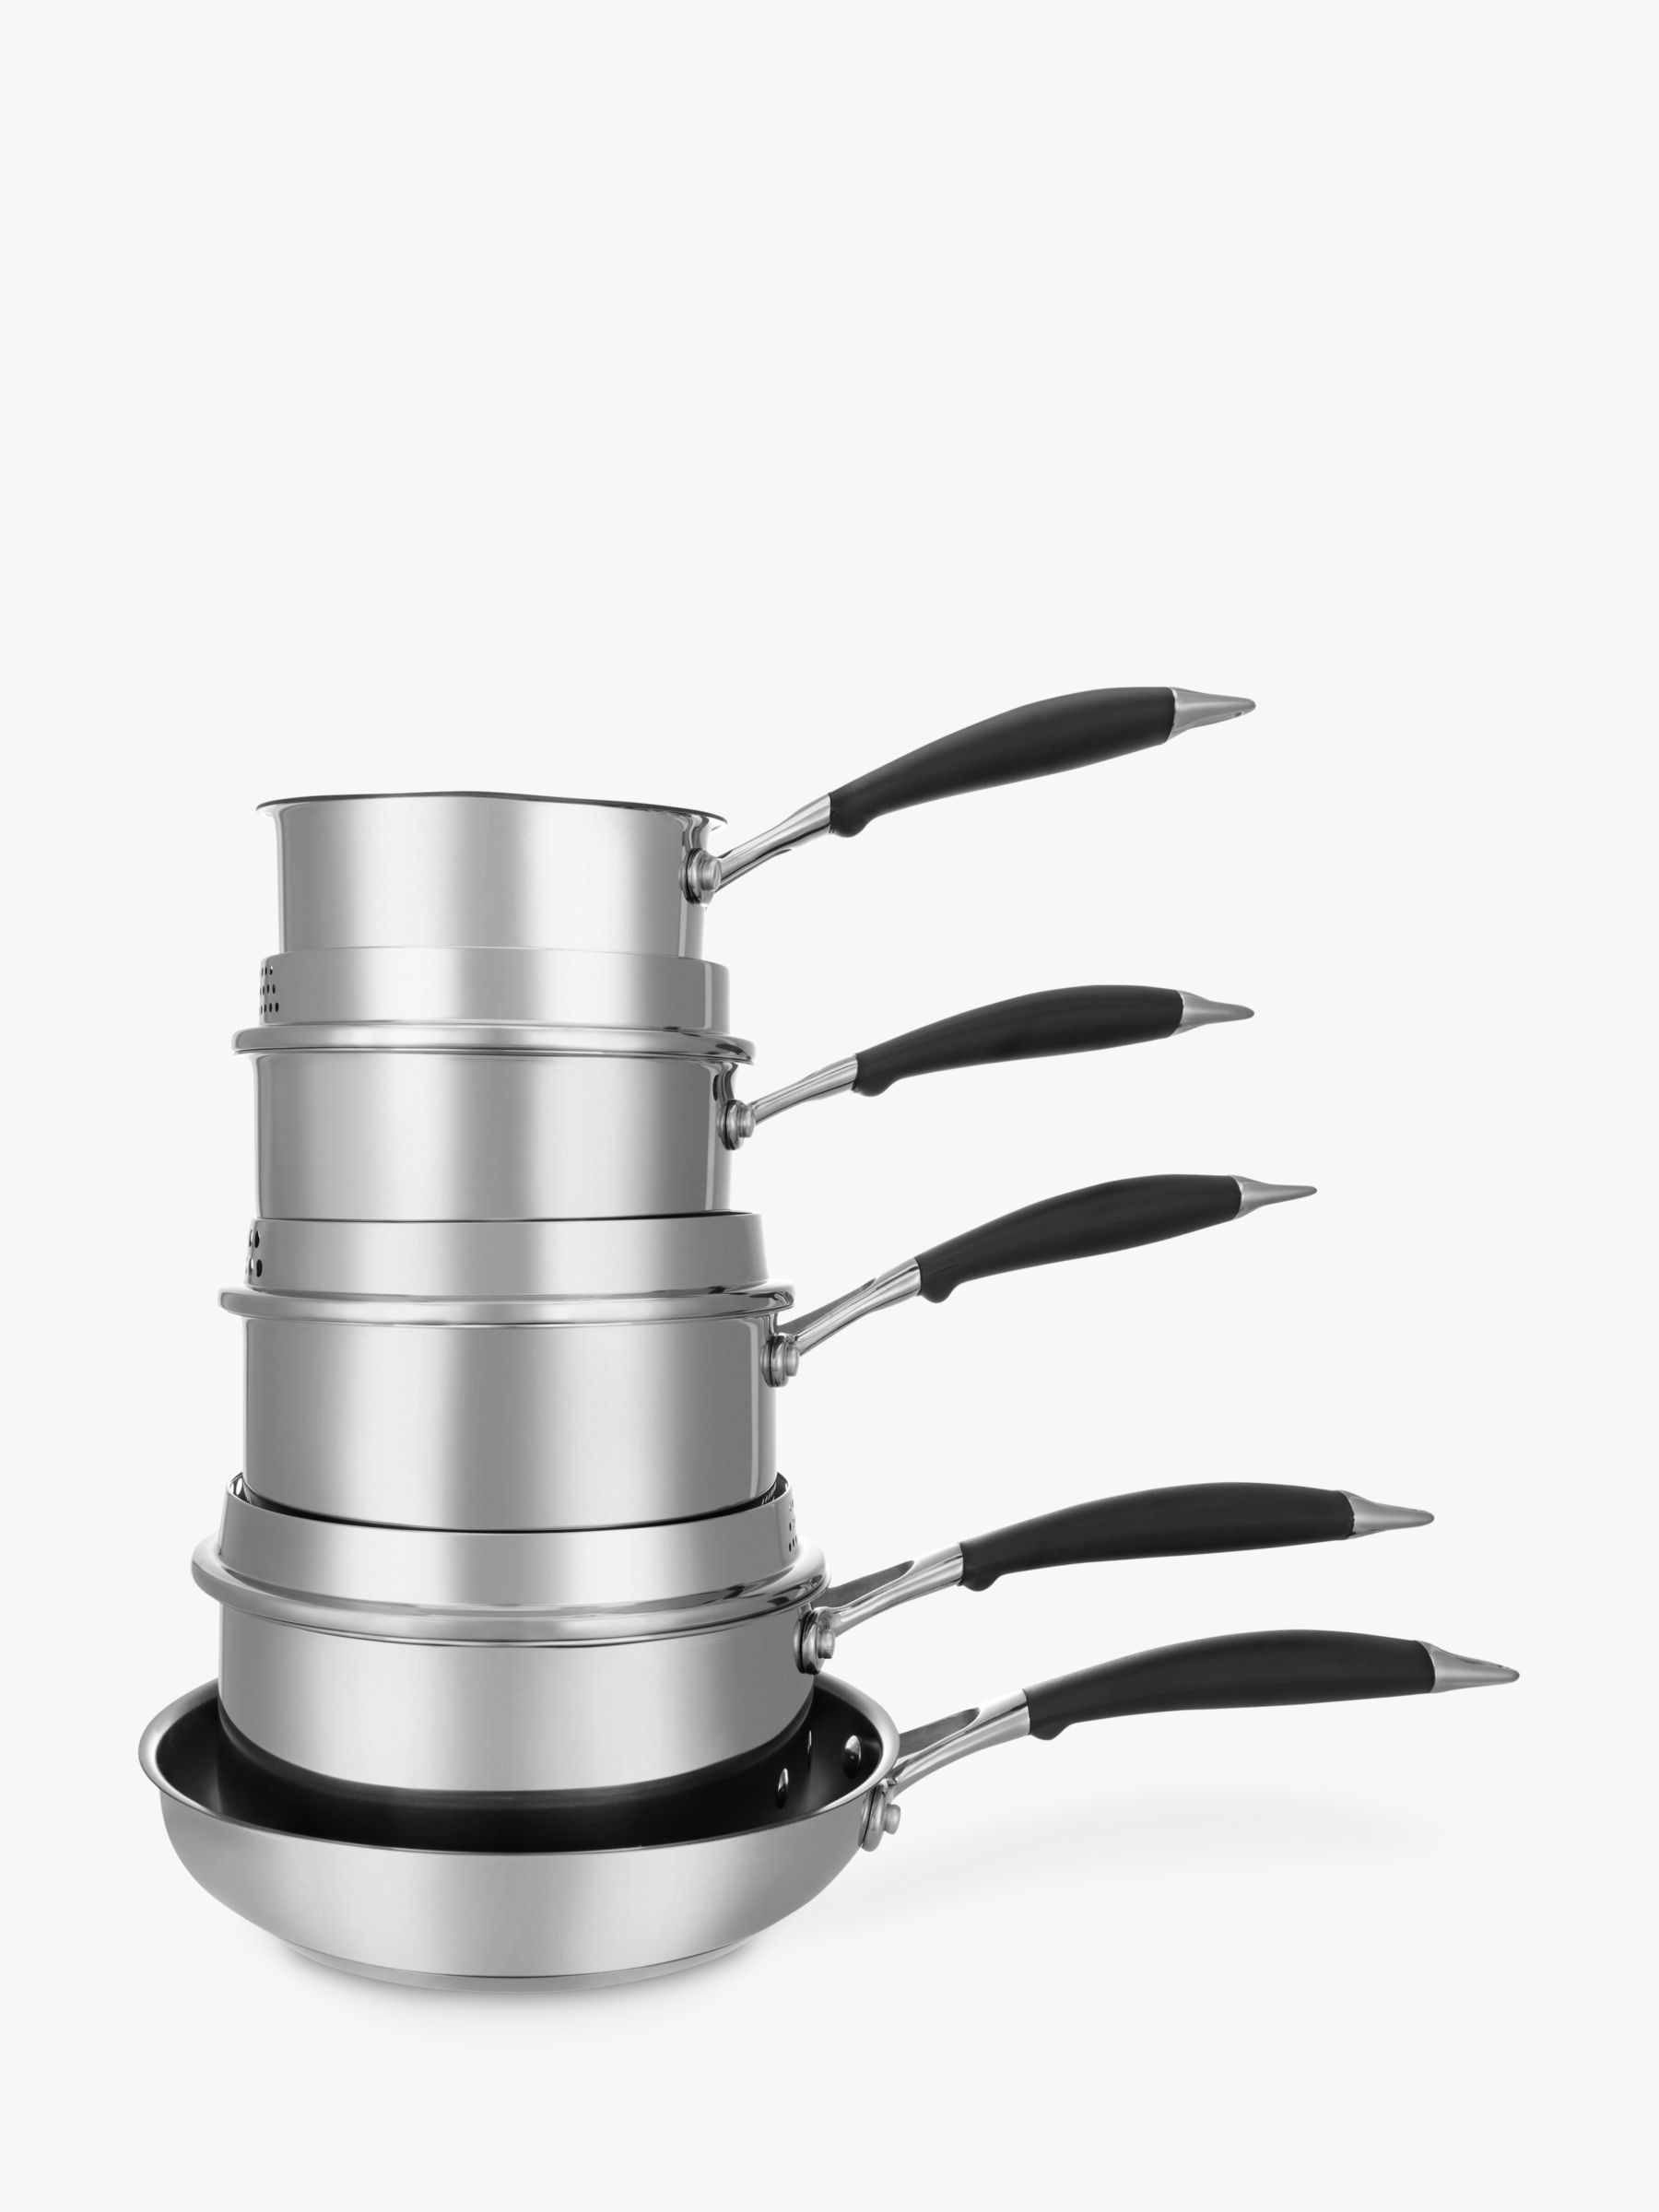 John Lewis & Partners 'The Pan' Stainless Steel Lidded Saucepans and Pan Set, 5 Pieces